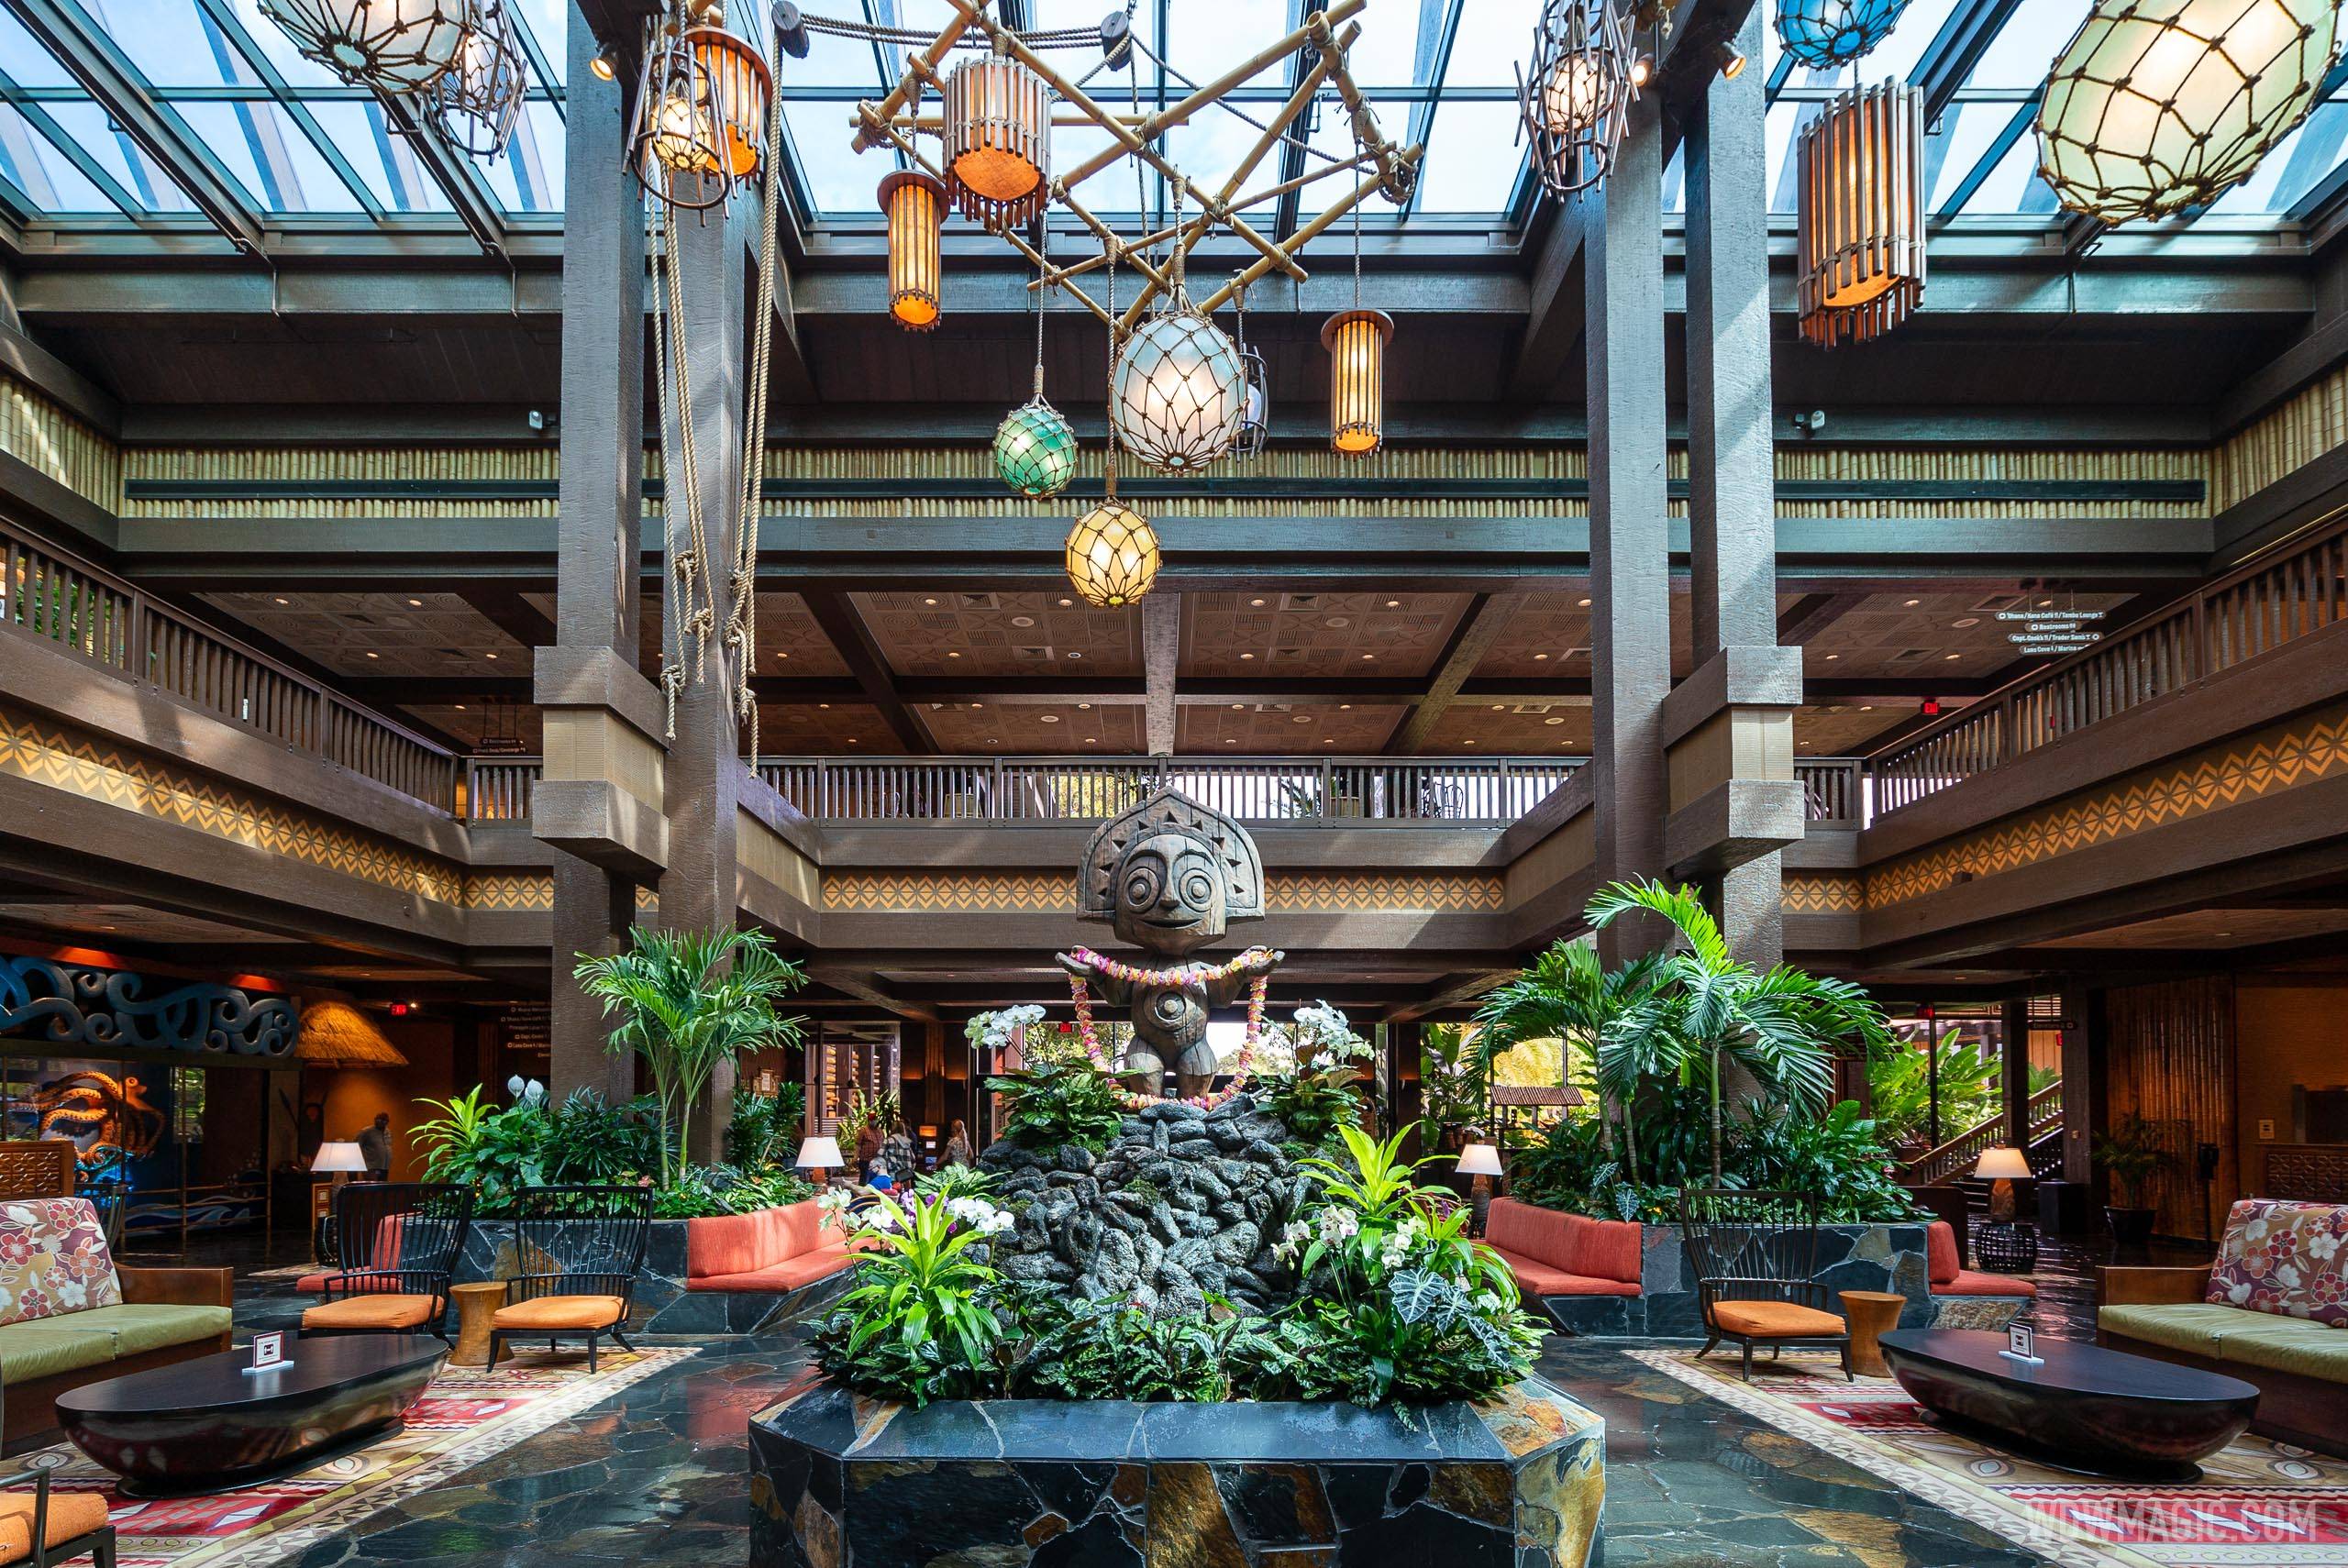 Dates announced for Club Level reopenings at Disney's Polynesian, Yacht Club and Beach Club resort hotels